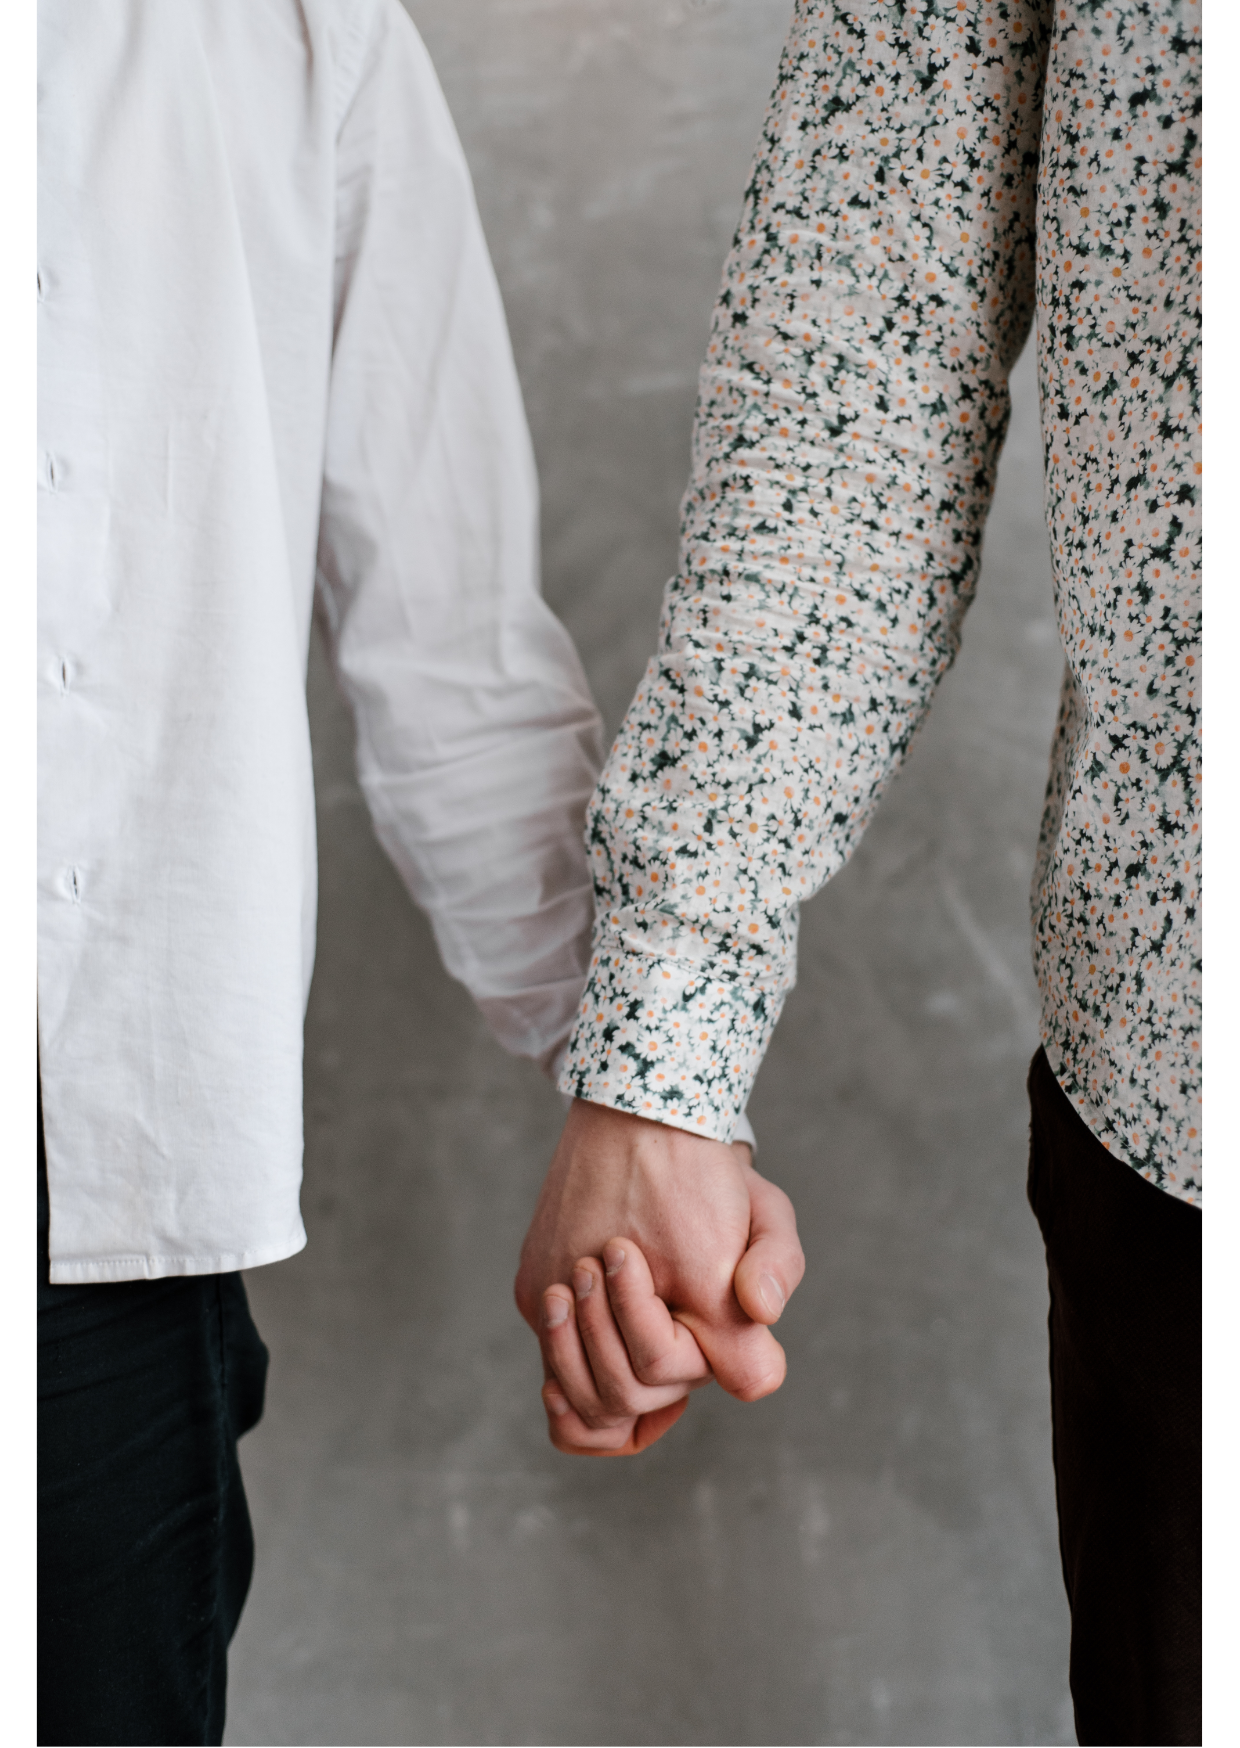 A close-up of a couple holding hands. This could symbolize the bond forged via therapy for new relationships in New Bern, NC and other services. Learn more about life changes counseling in North Carolina by contacting an online therapist in North Carolina.